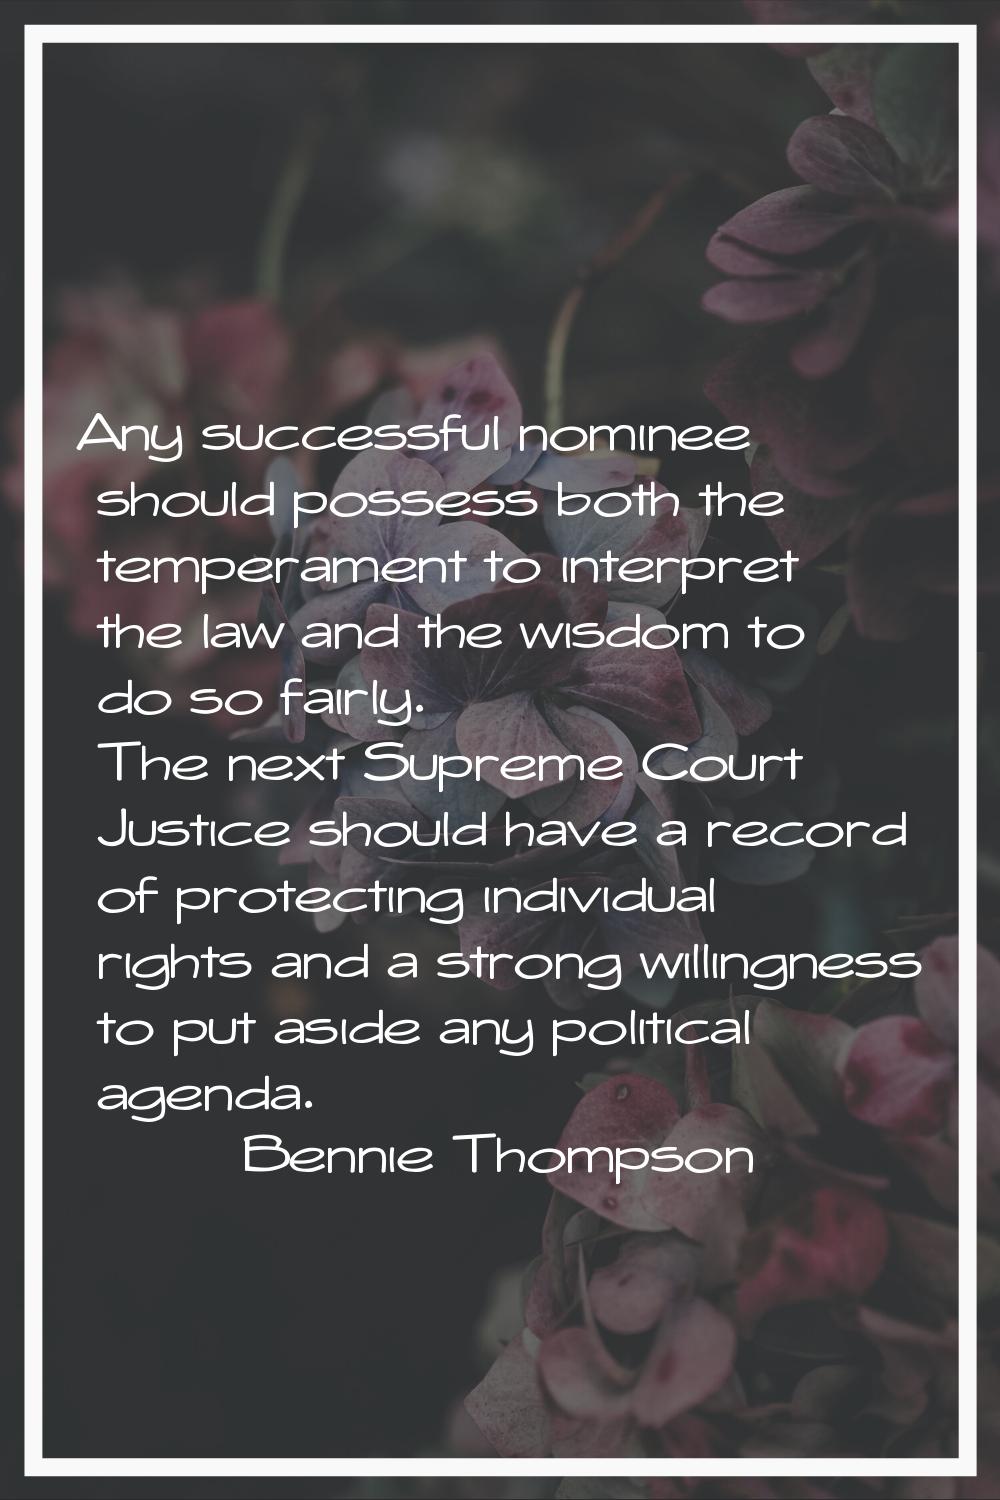 Any successful nominee should possess both the temperament to interpret the law and the wisdom to d